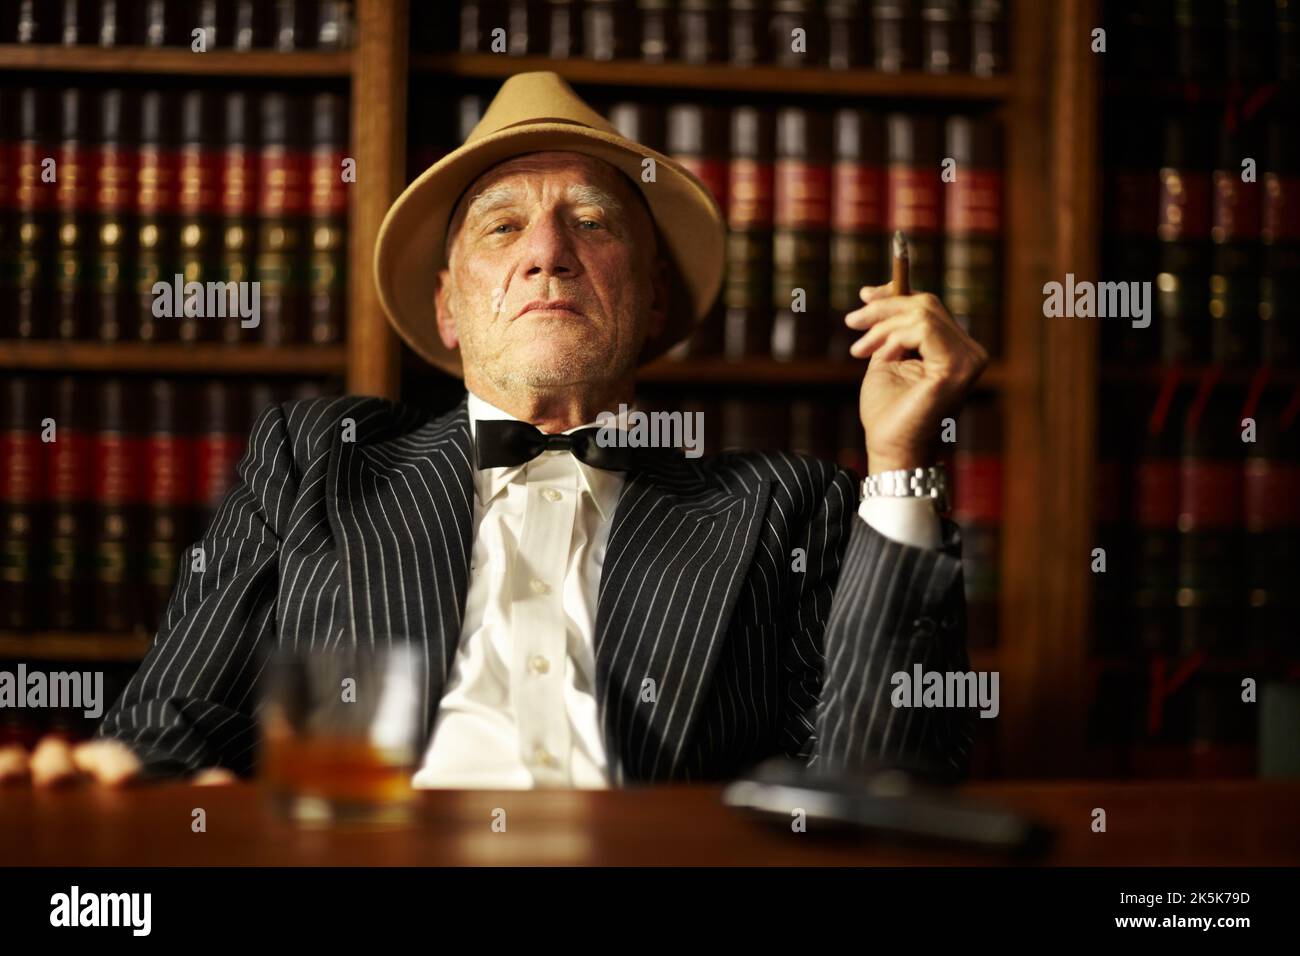 Crime is all about control. Aged mob boss smoking a cigar and looking serious from behind his desk. Stock Photo